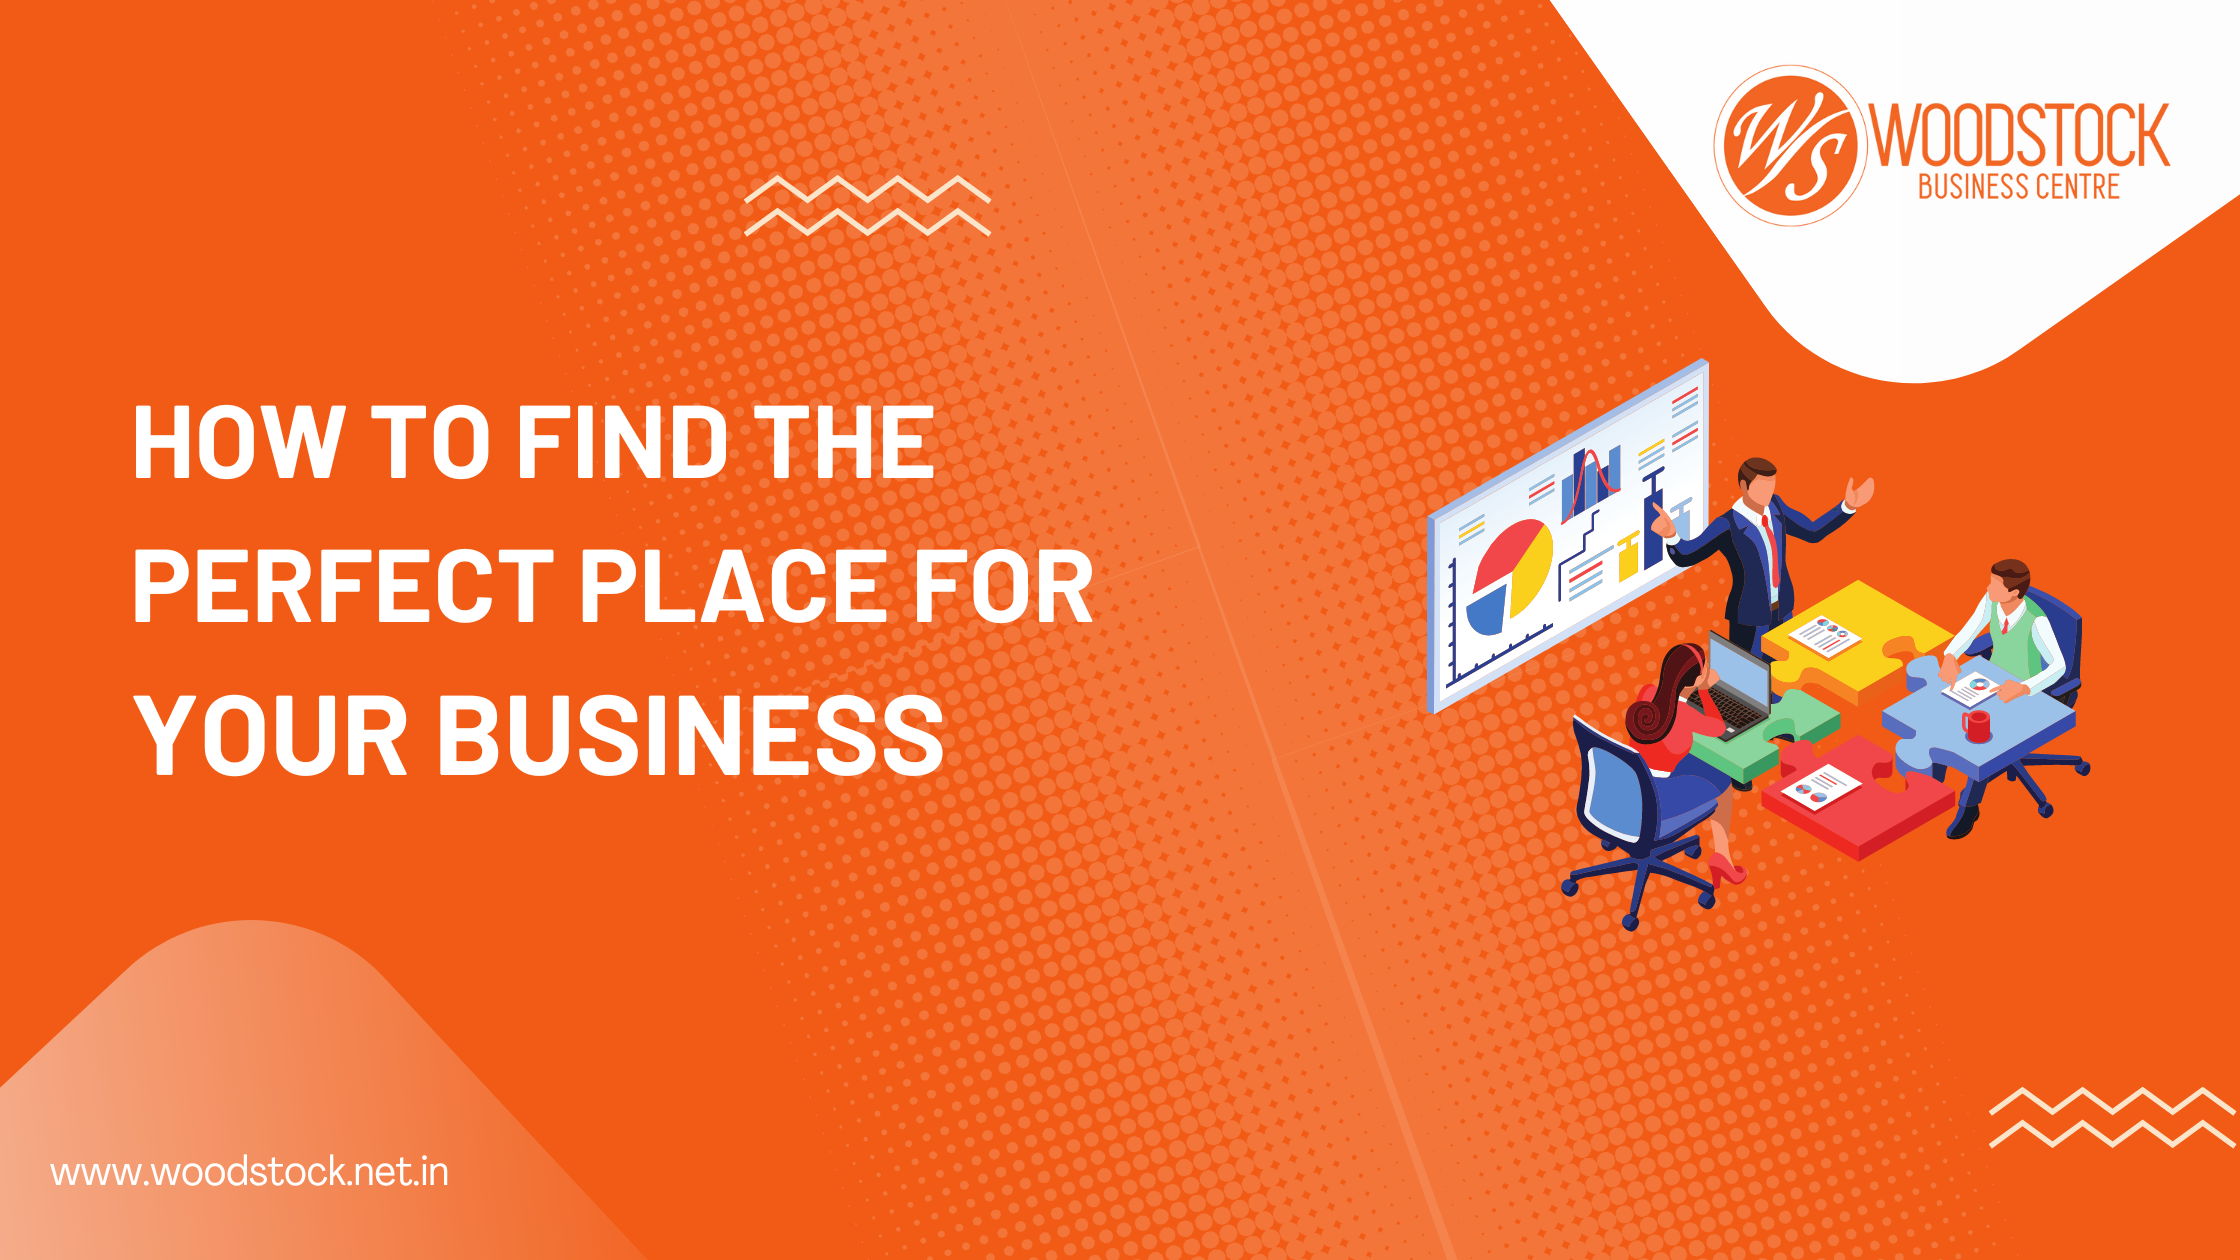 All Inclusive Office Space – How To Find The Perfect Place for Your Business